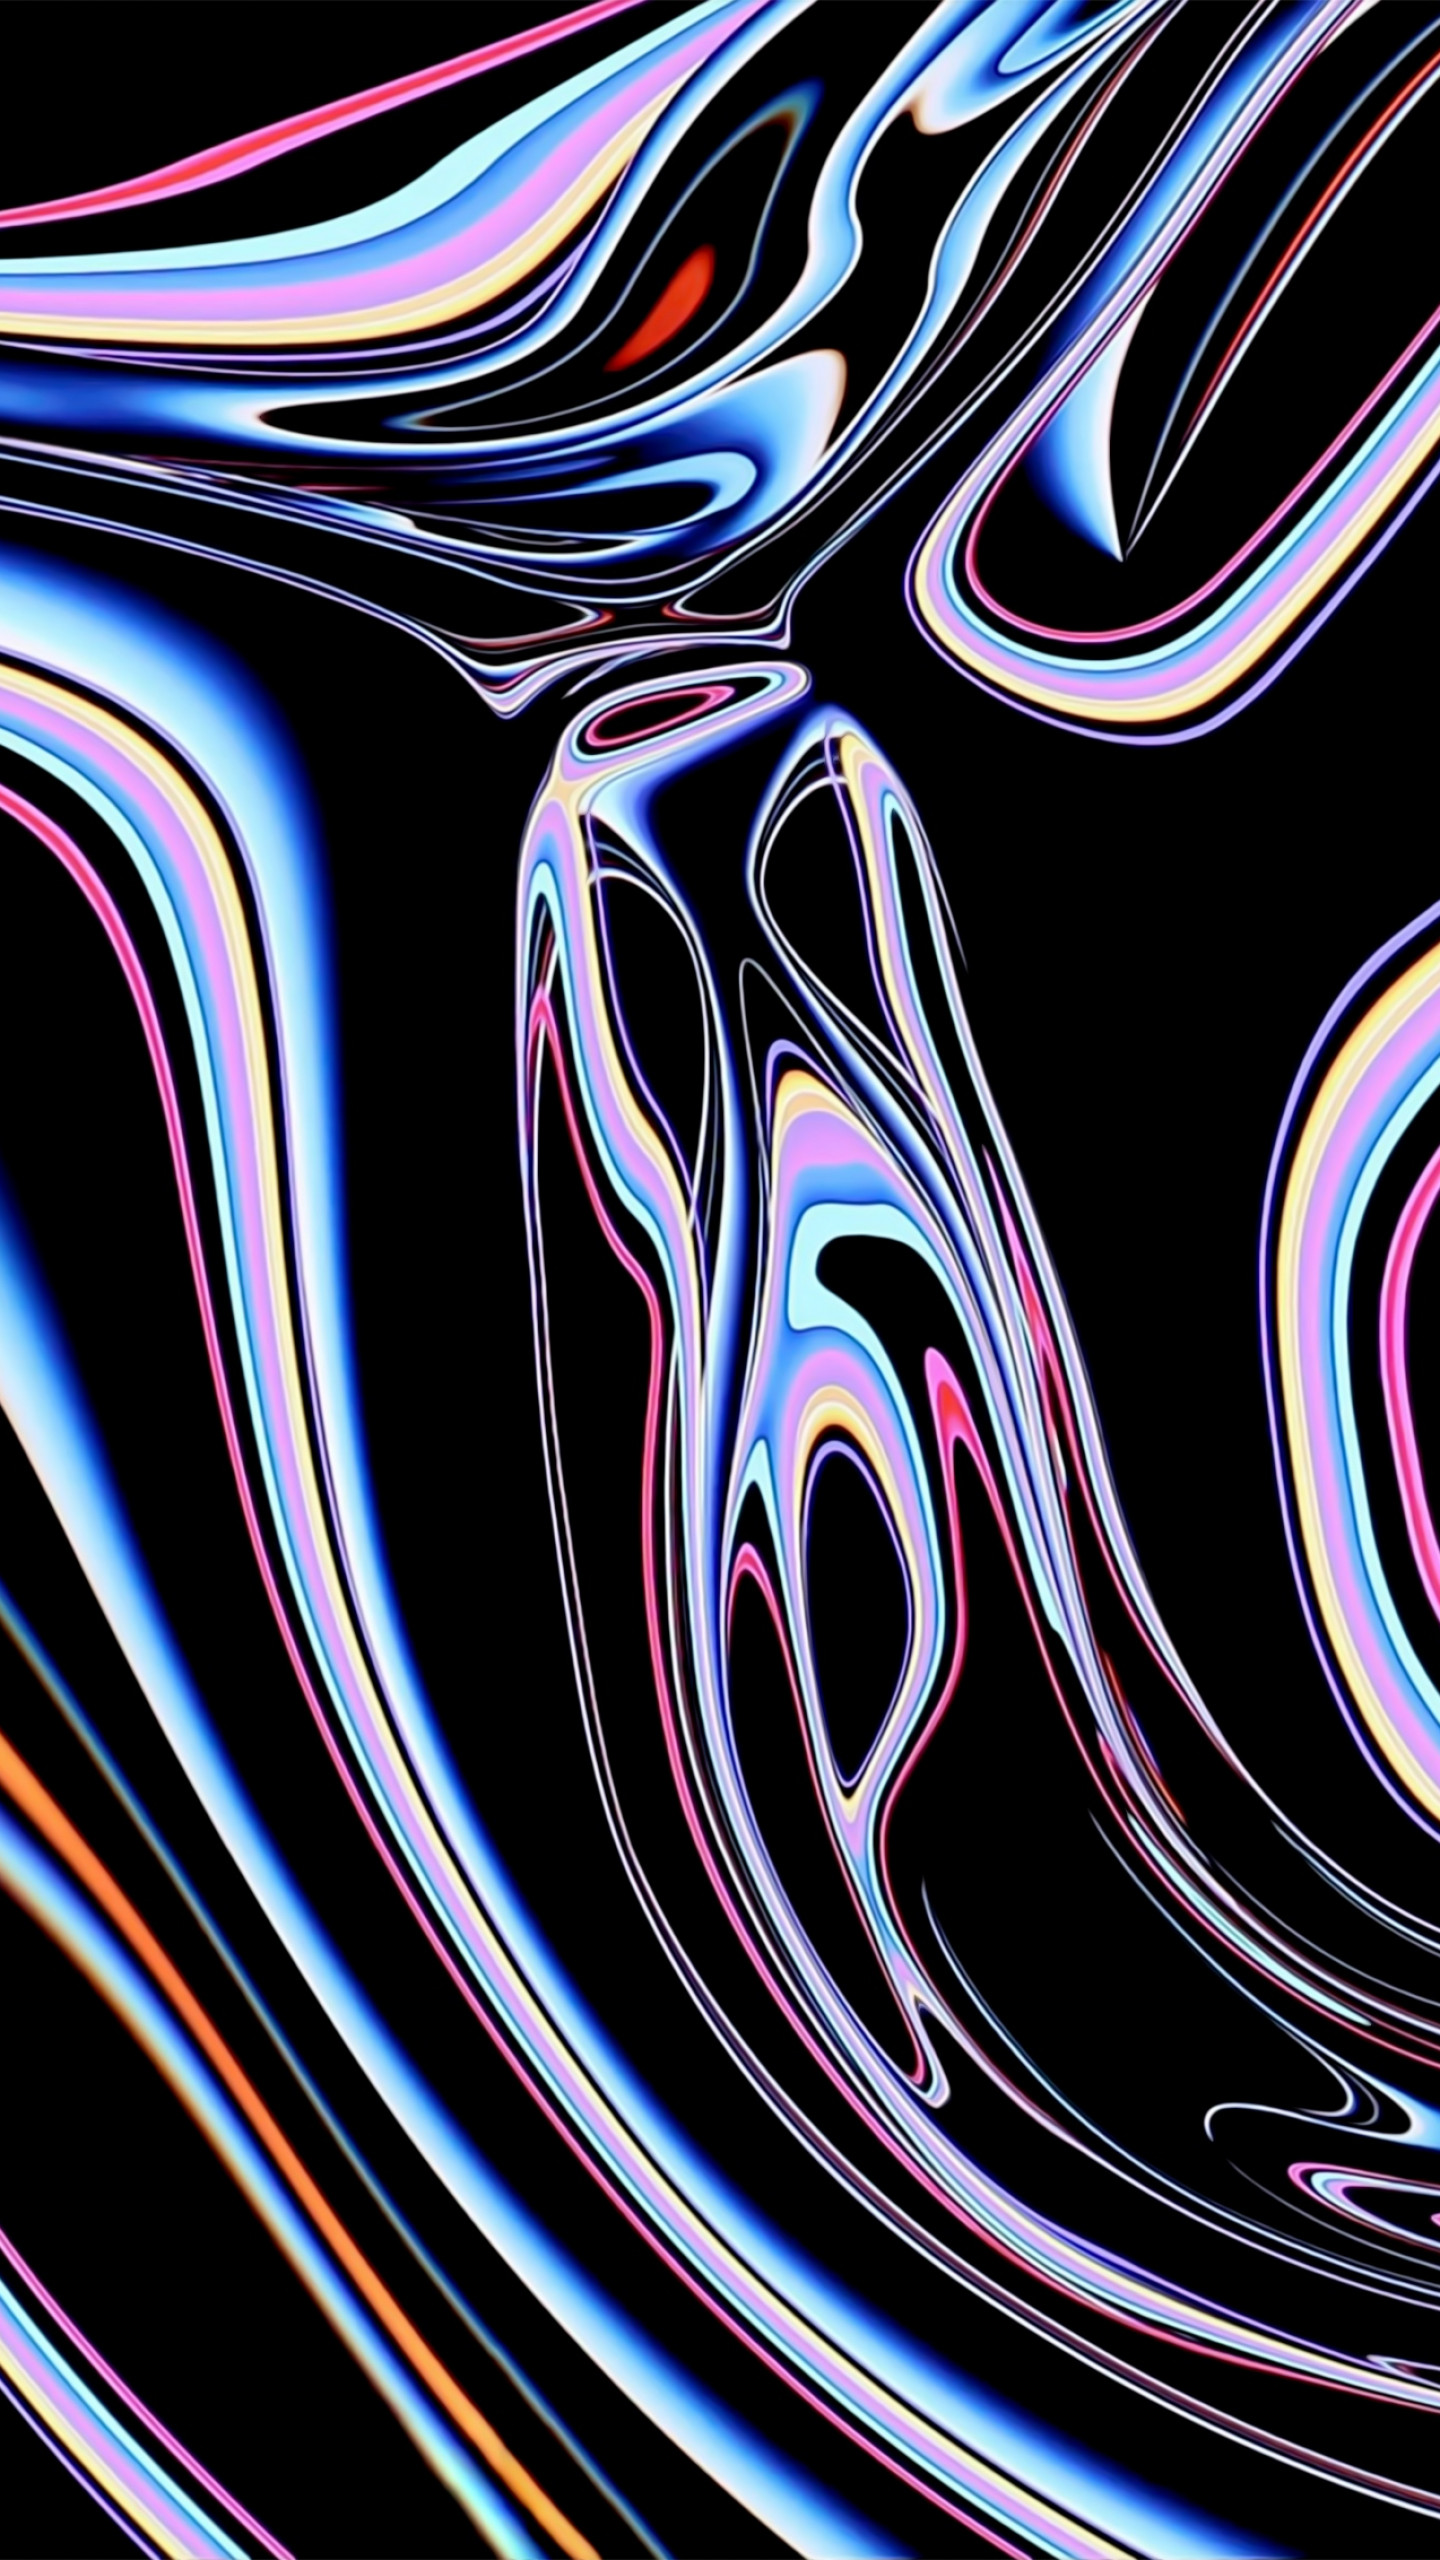 Wallpaper Apple Pro Display Xdr Abstract 4k Wwdc 2019 Os 21619